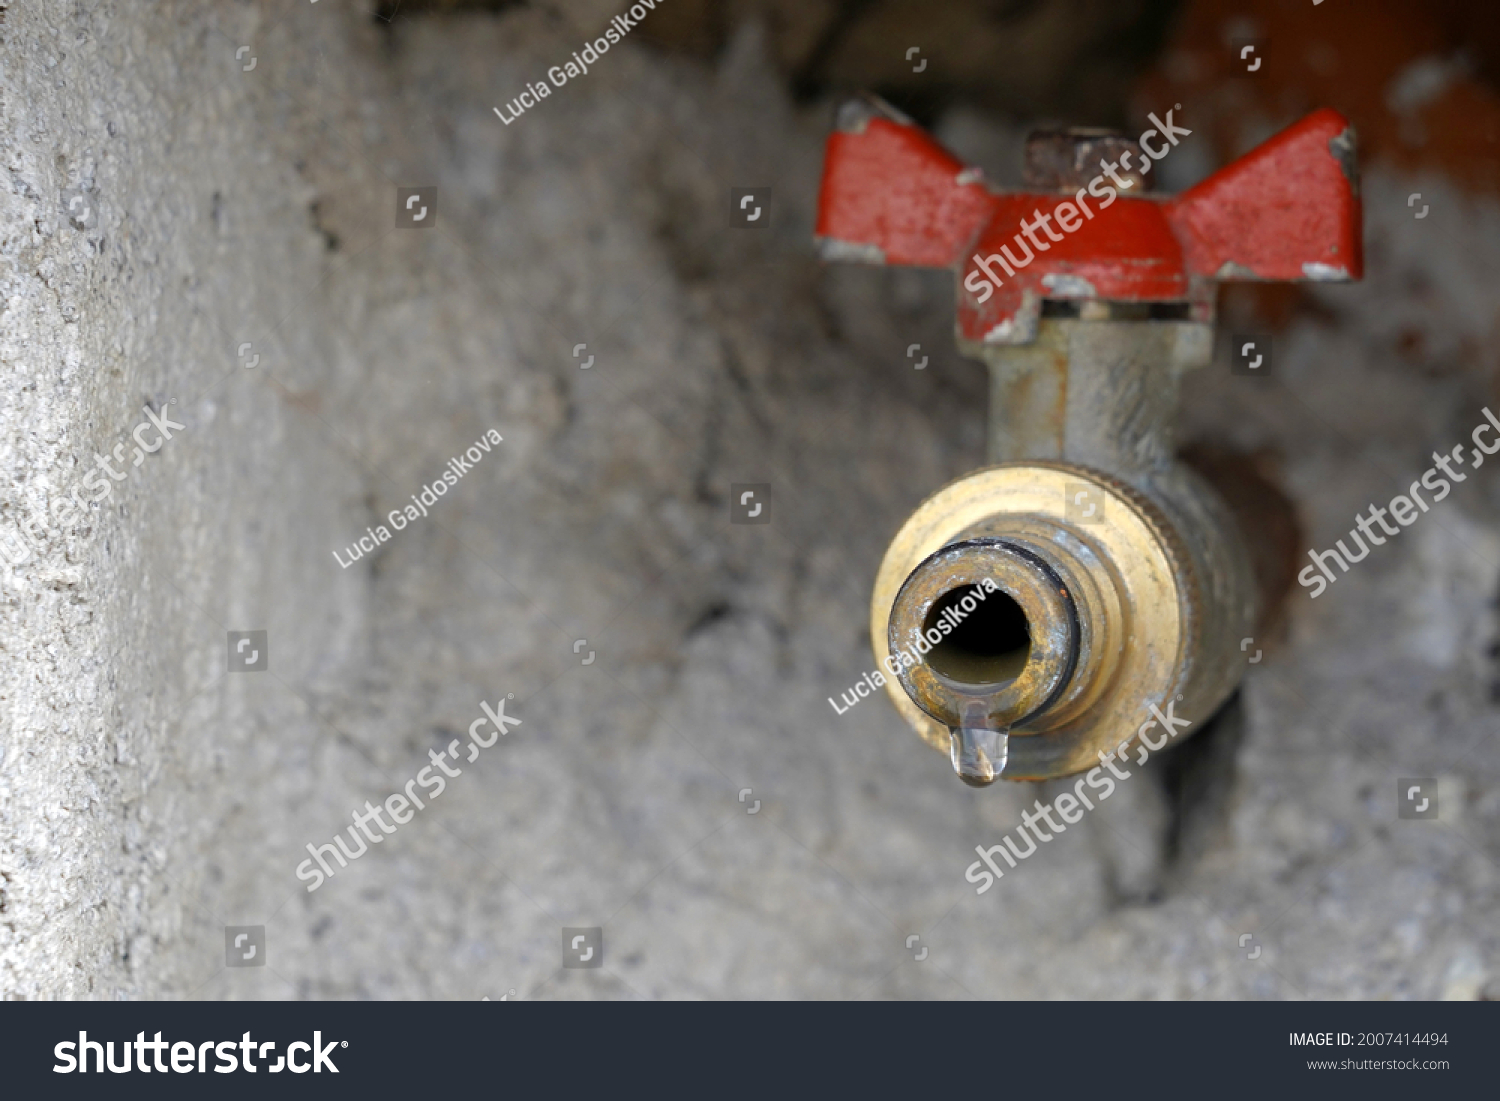 Stock Photo Outdoor Hose Bib Or Hydrant Installed In Wall Il Is Leaking Slightly And There Is A Drop Of Water 2007414494 